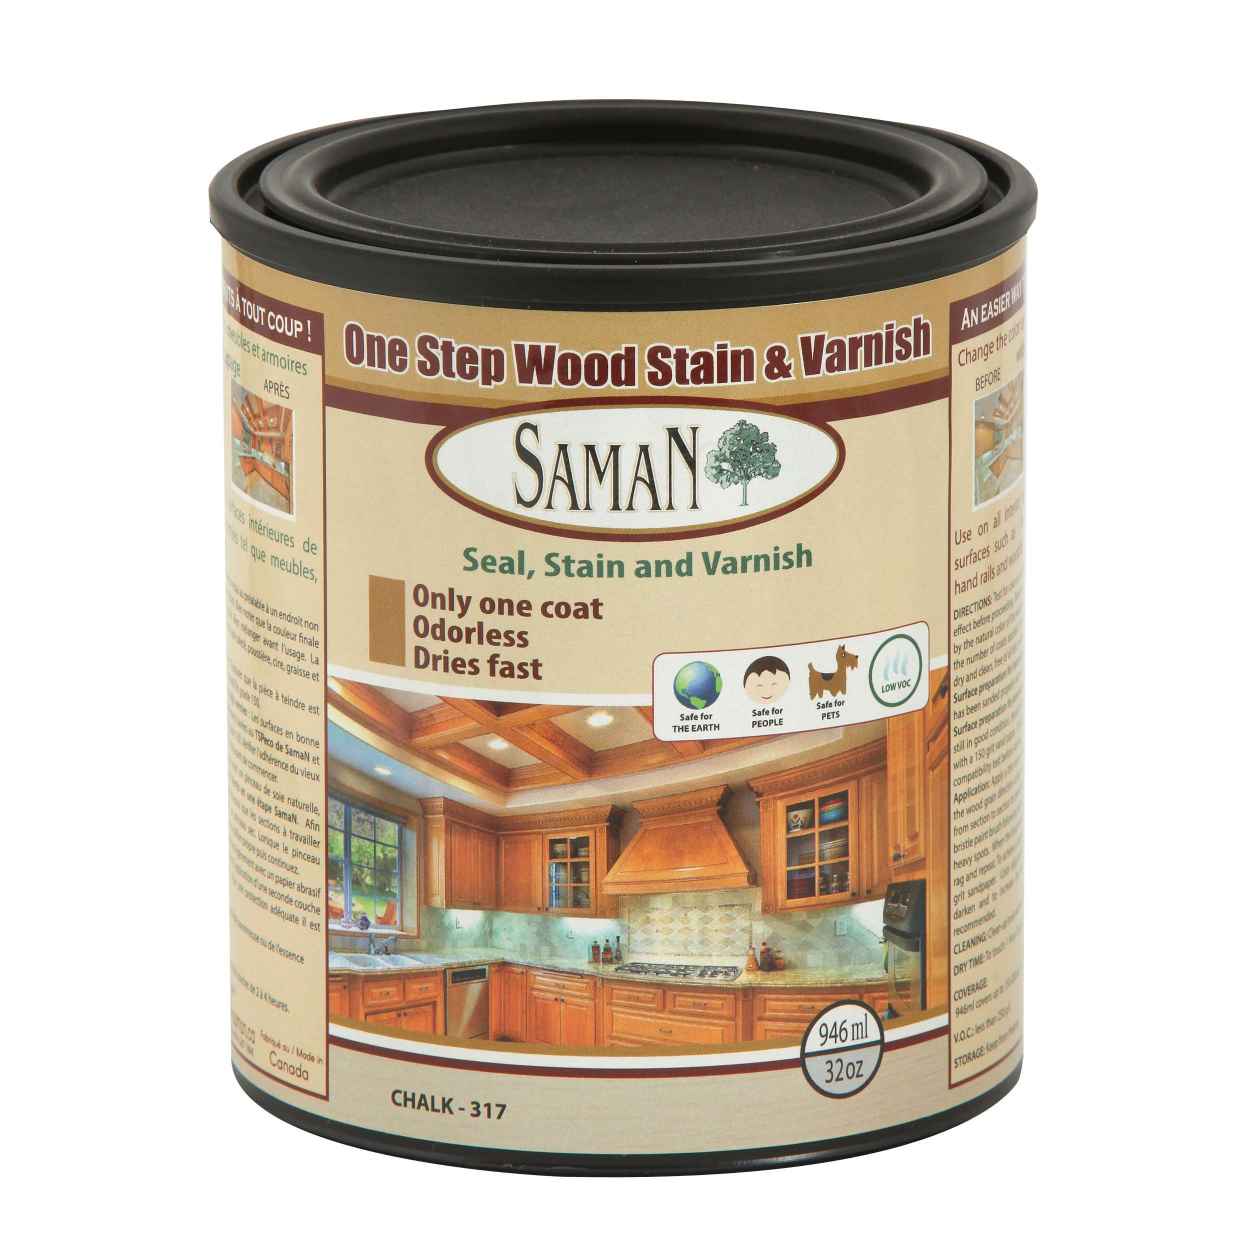 One step wood stain and varnish SamaN